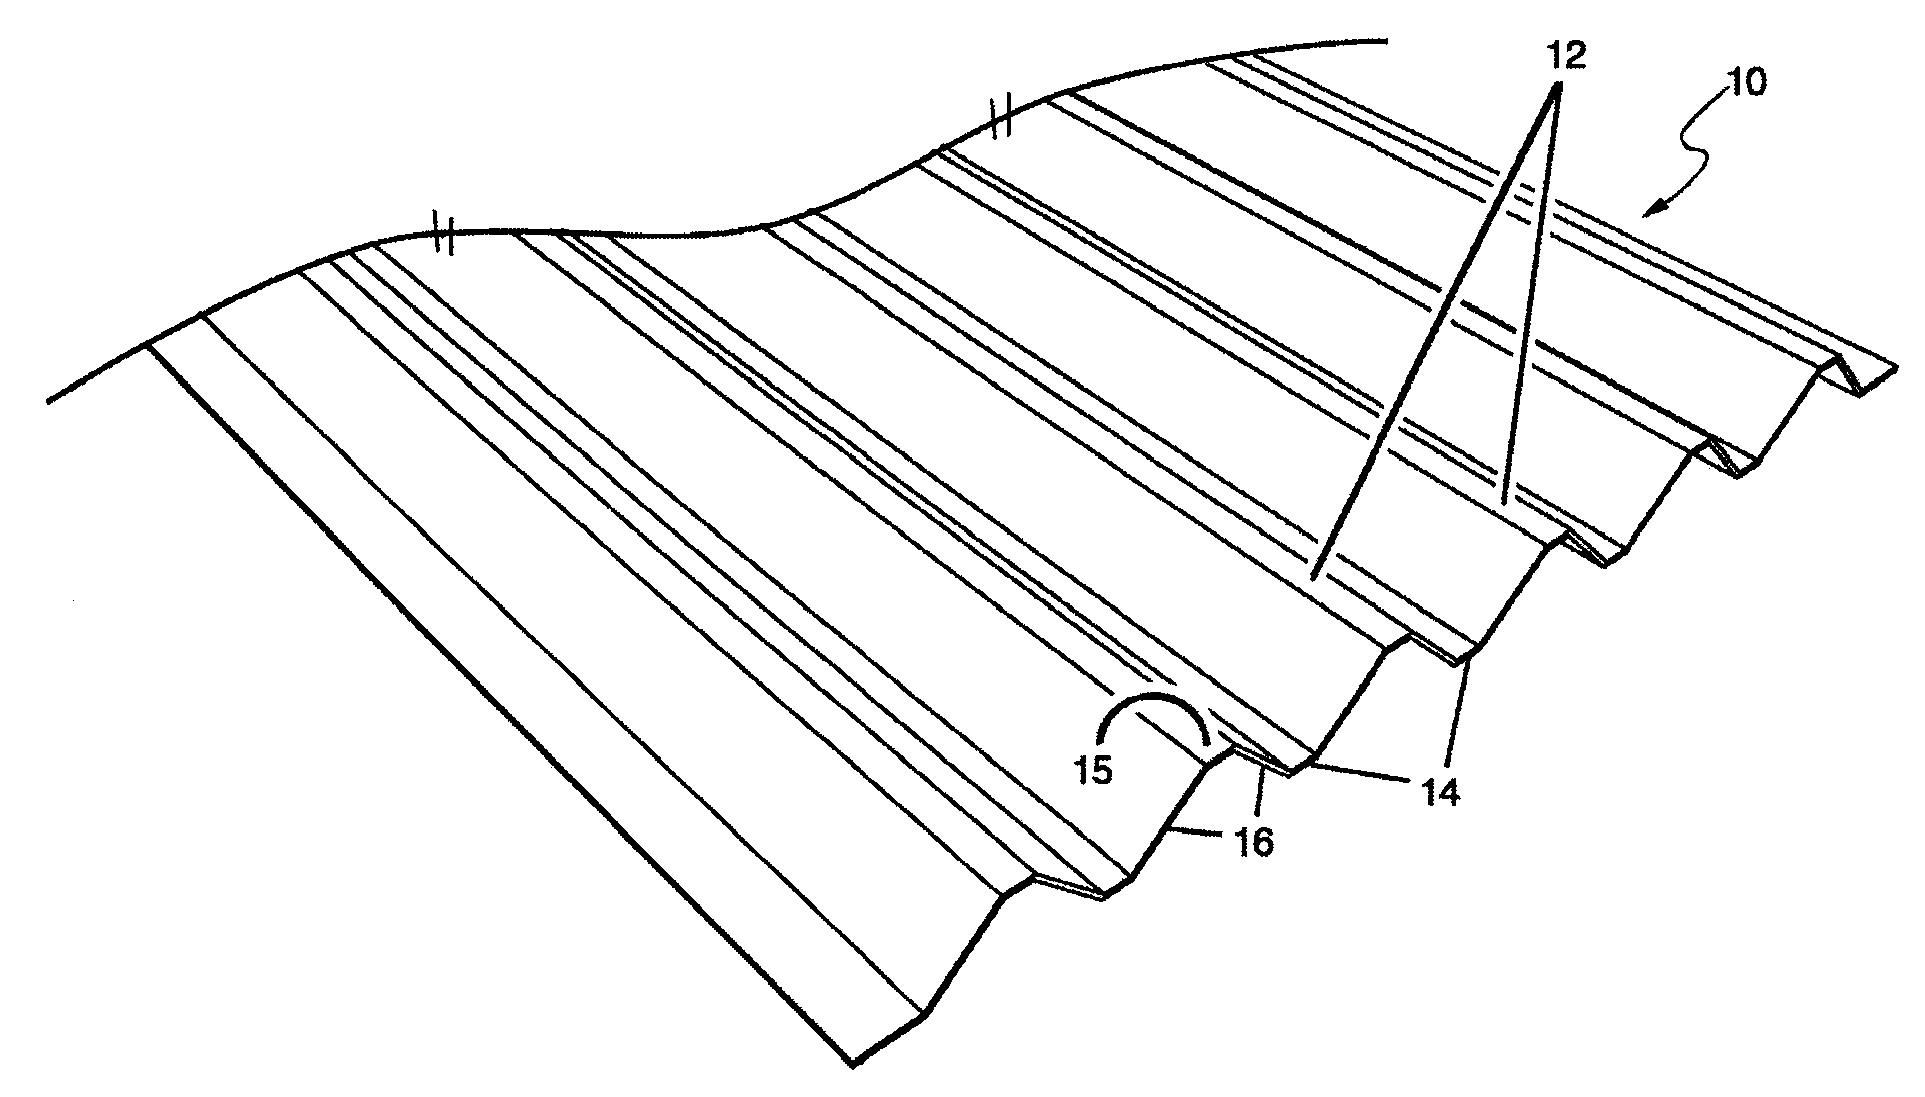 Engineered Molded Fiberboard Panels and Methods of Making and Using the Same